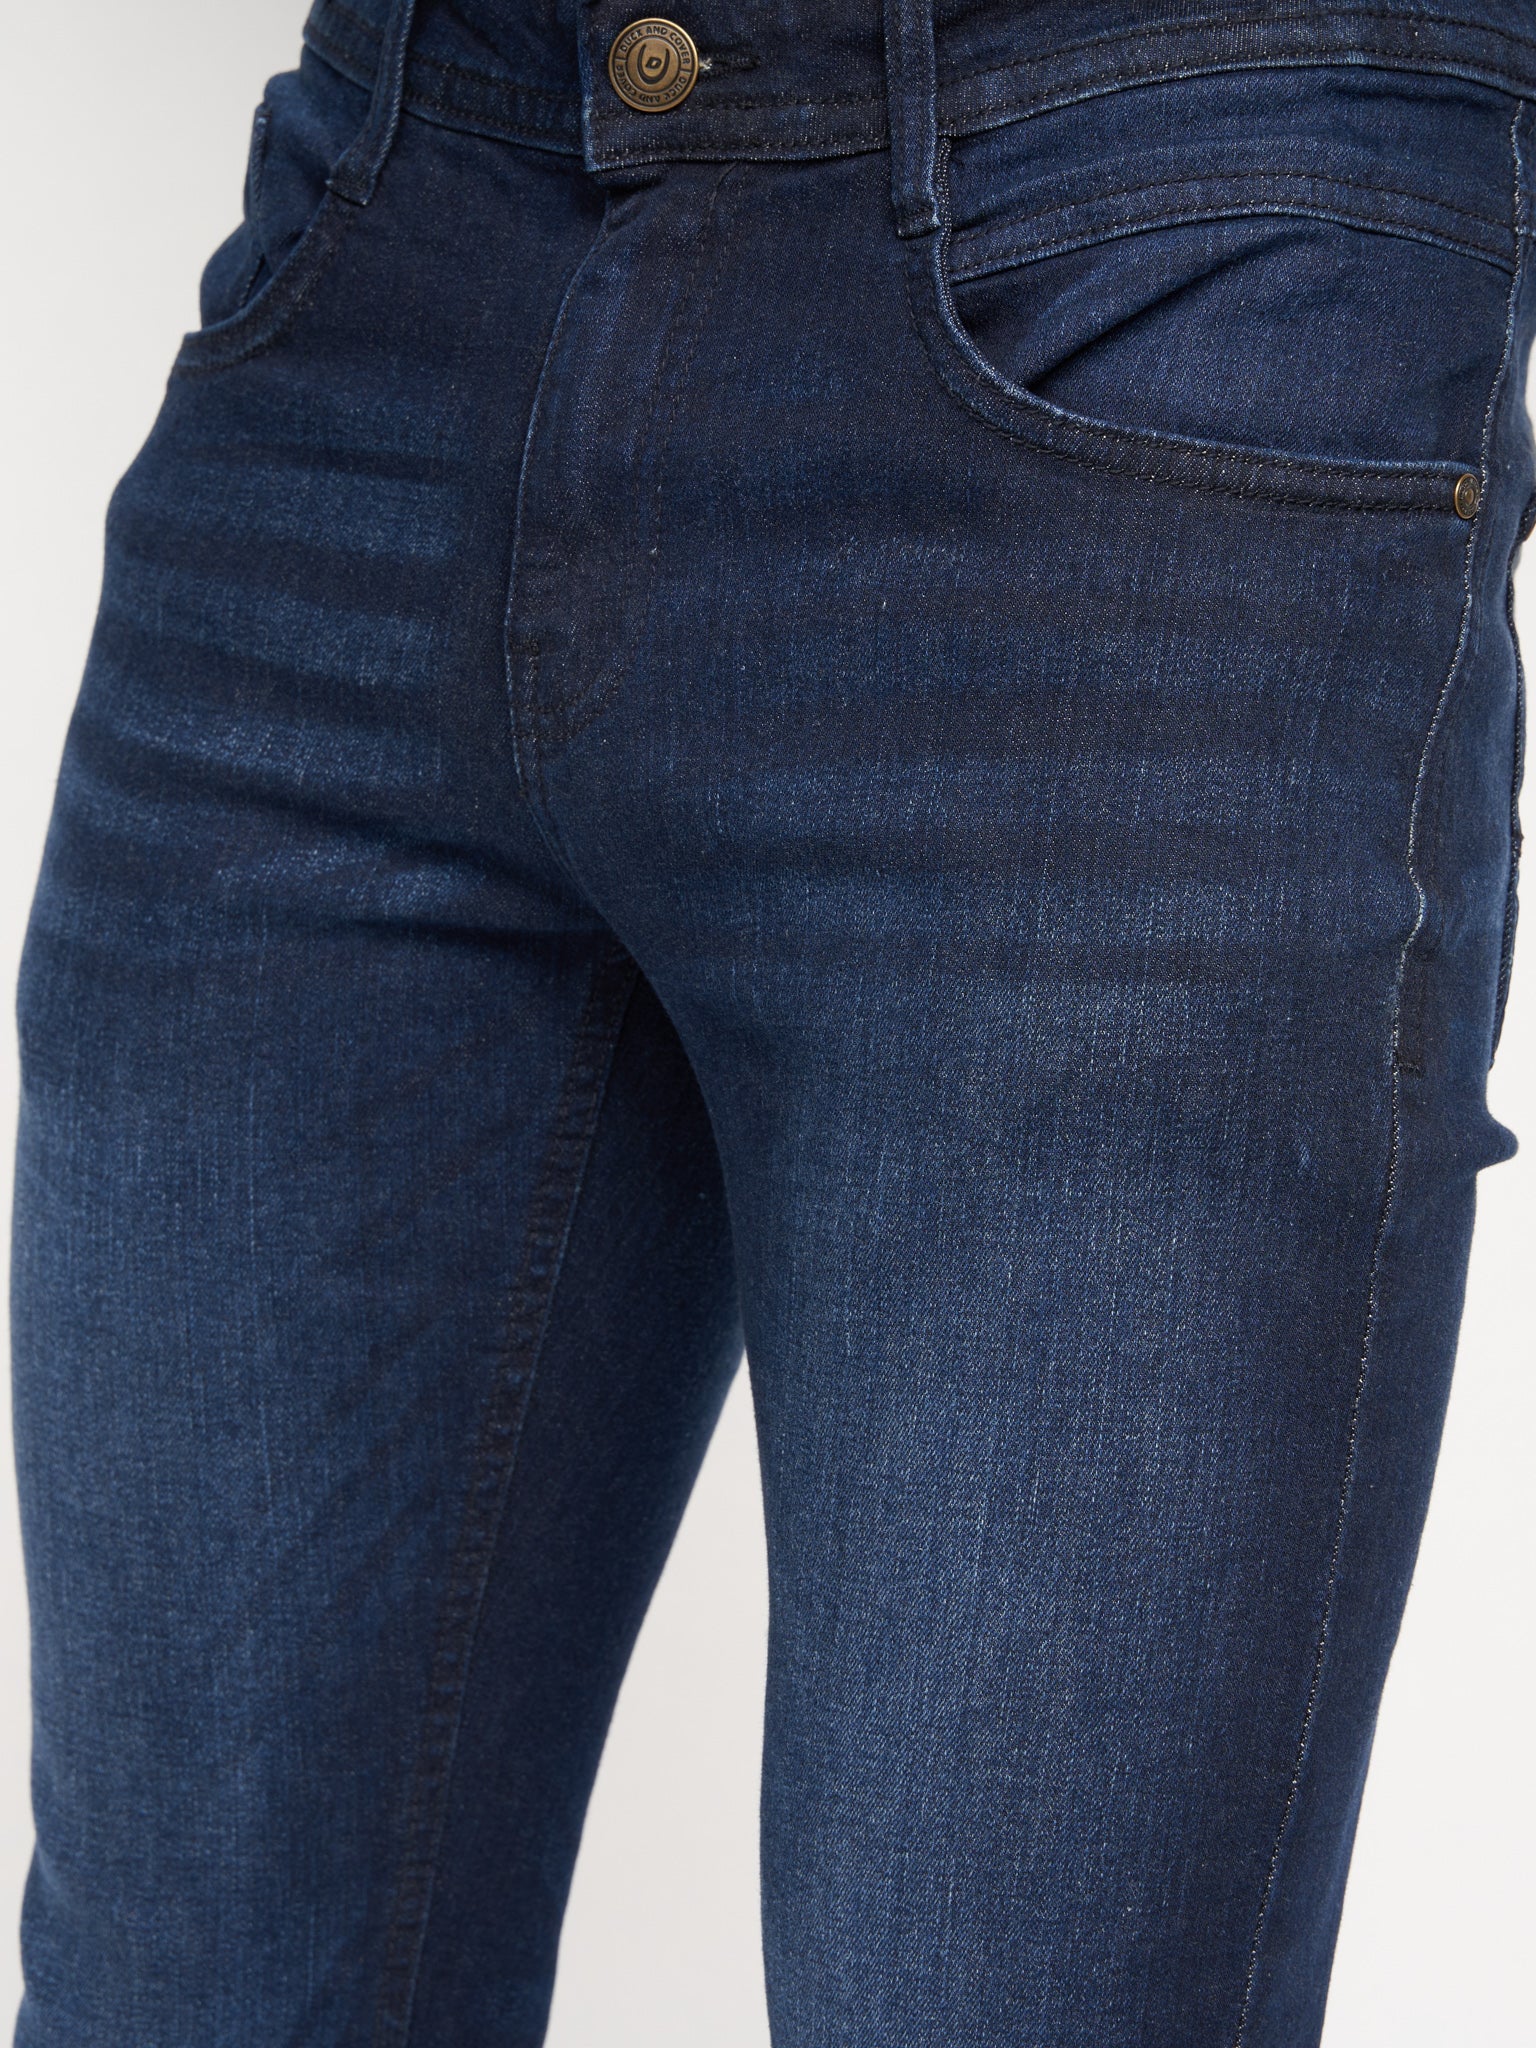 Duck and Cover - Mens Maylead Slim Fit Jeans Dark Wash